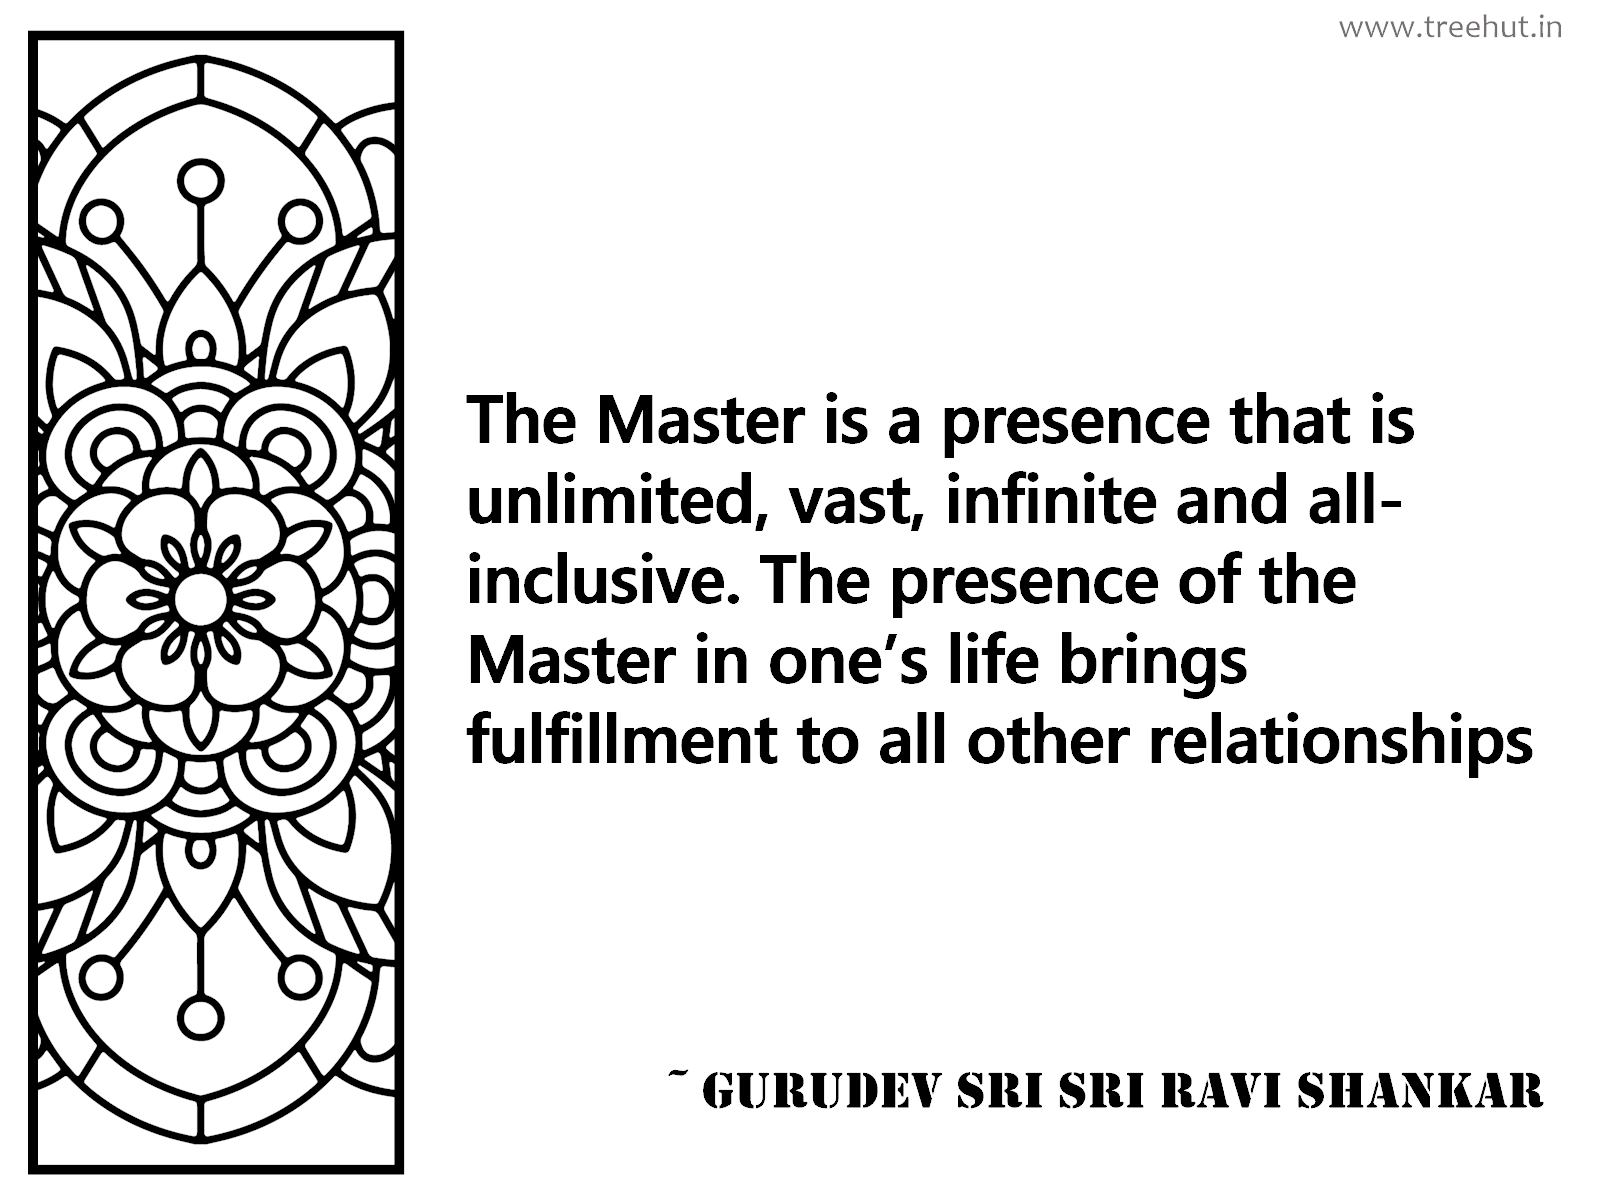 The Master is a presence that is unlimited, vast, infinite and all-inclusive. The presence of the Master in one’s life brings fulfillment to all other relationships Inspirational Quote by Gurudev Sri Sri Ravi Shankar, coloring pages